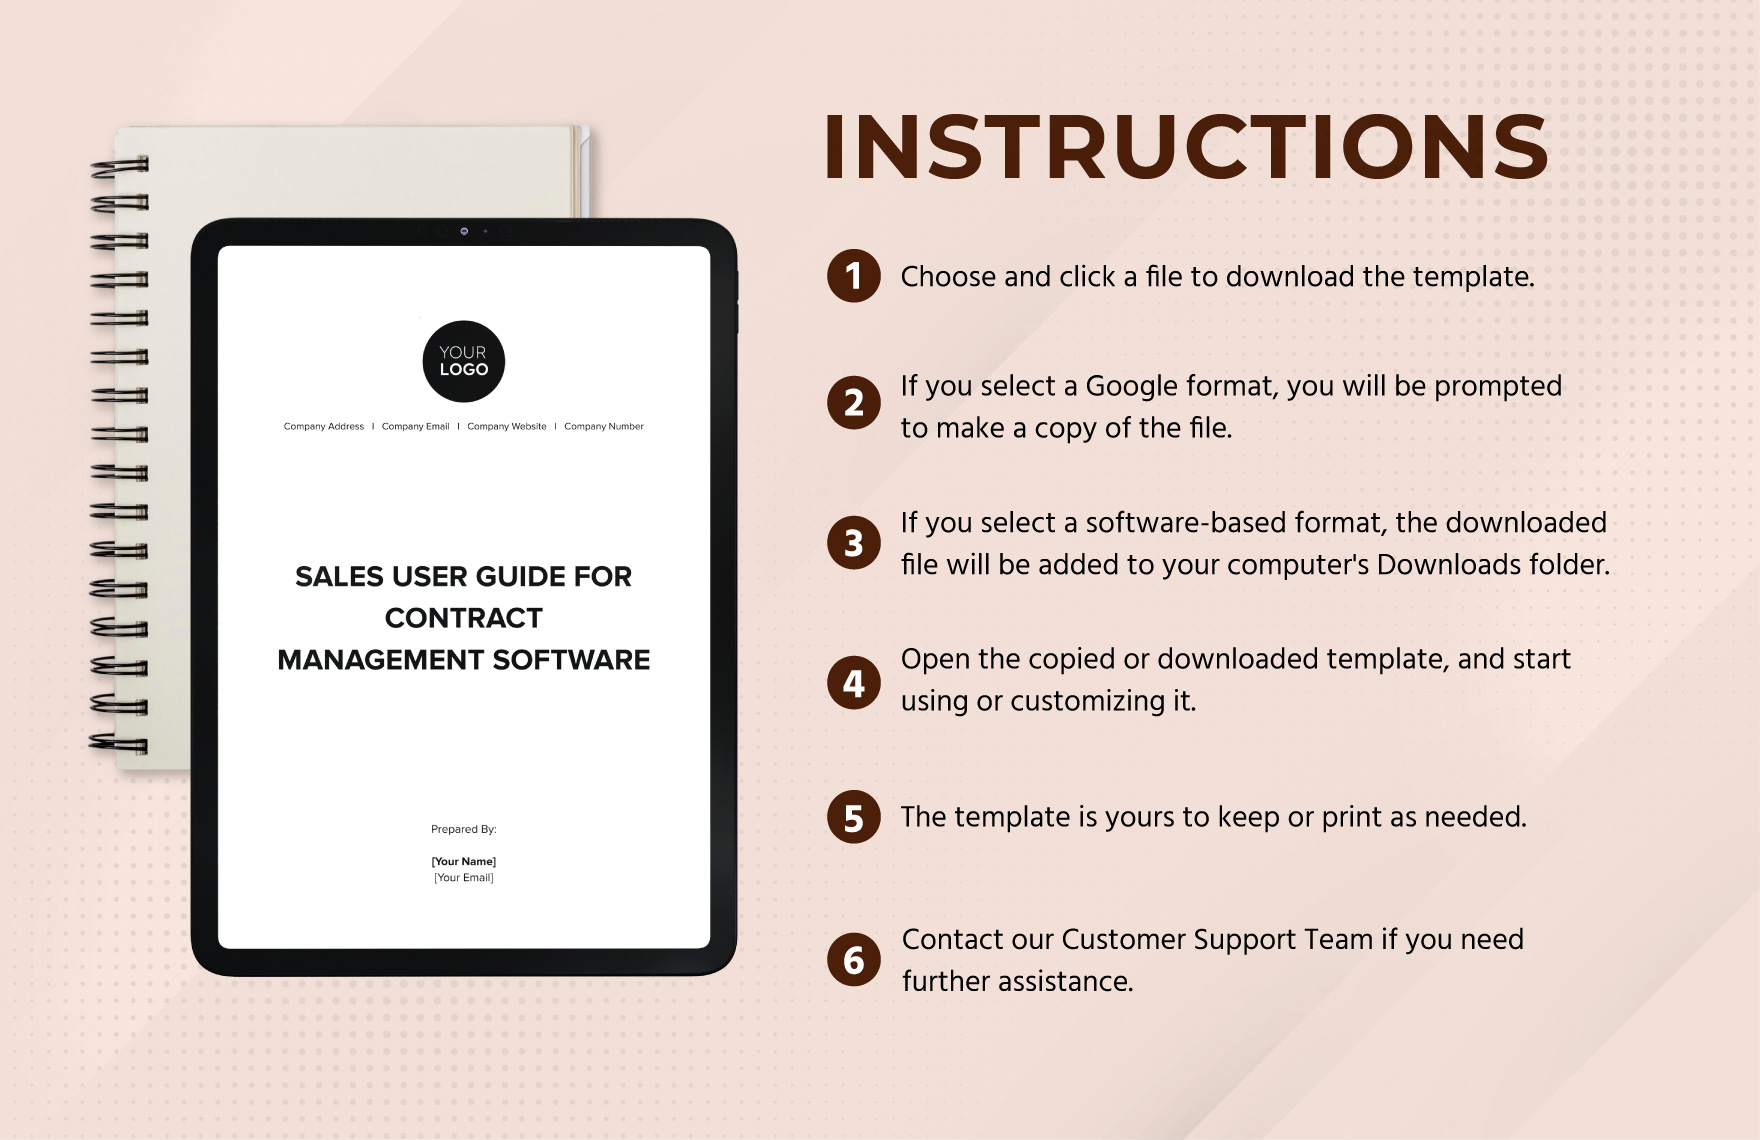 Sales User Guide for Contract Management Software Template